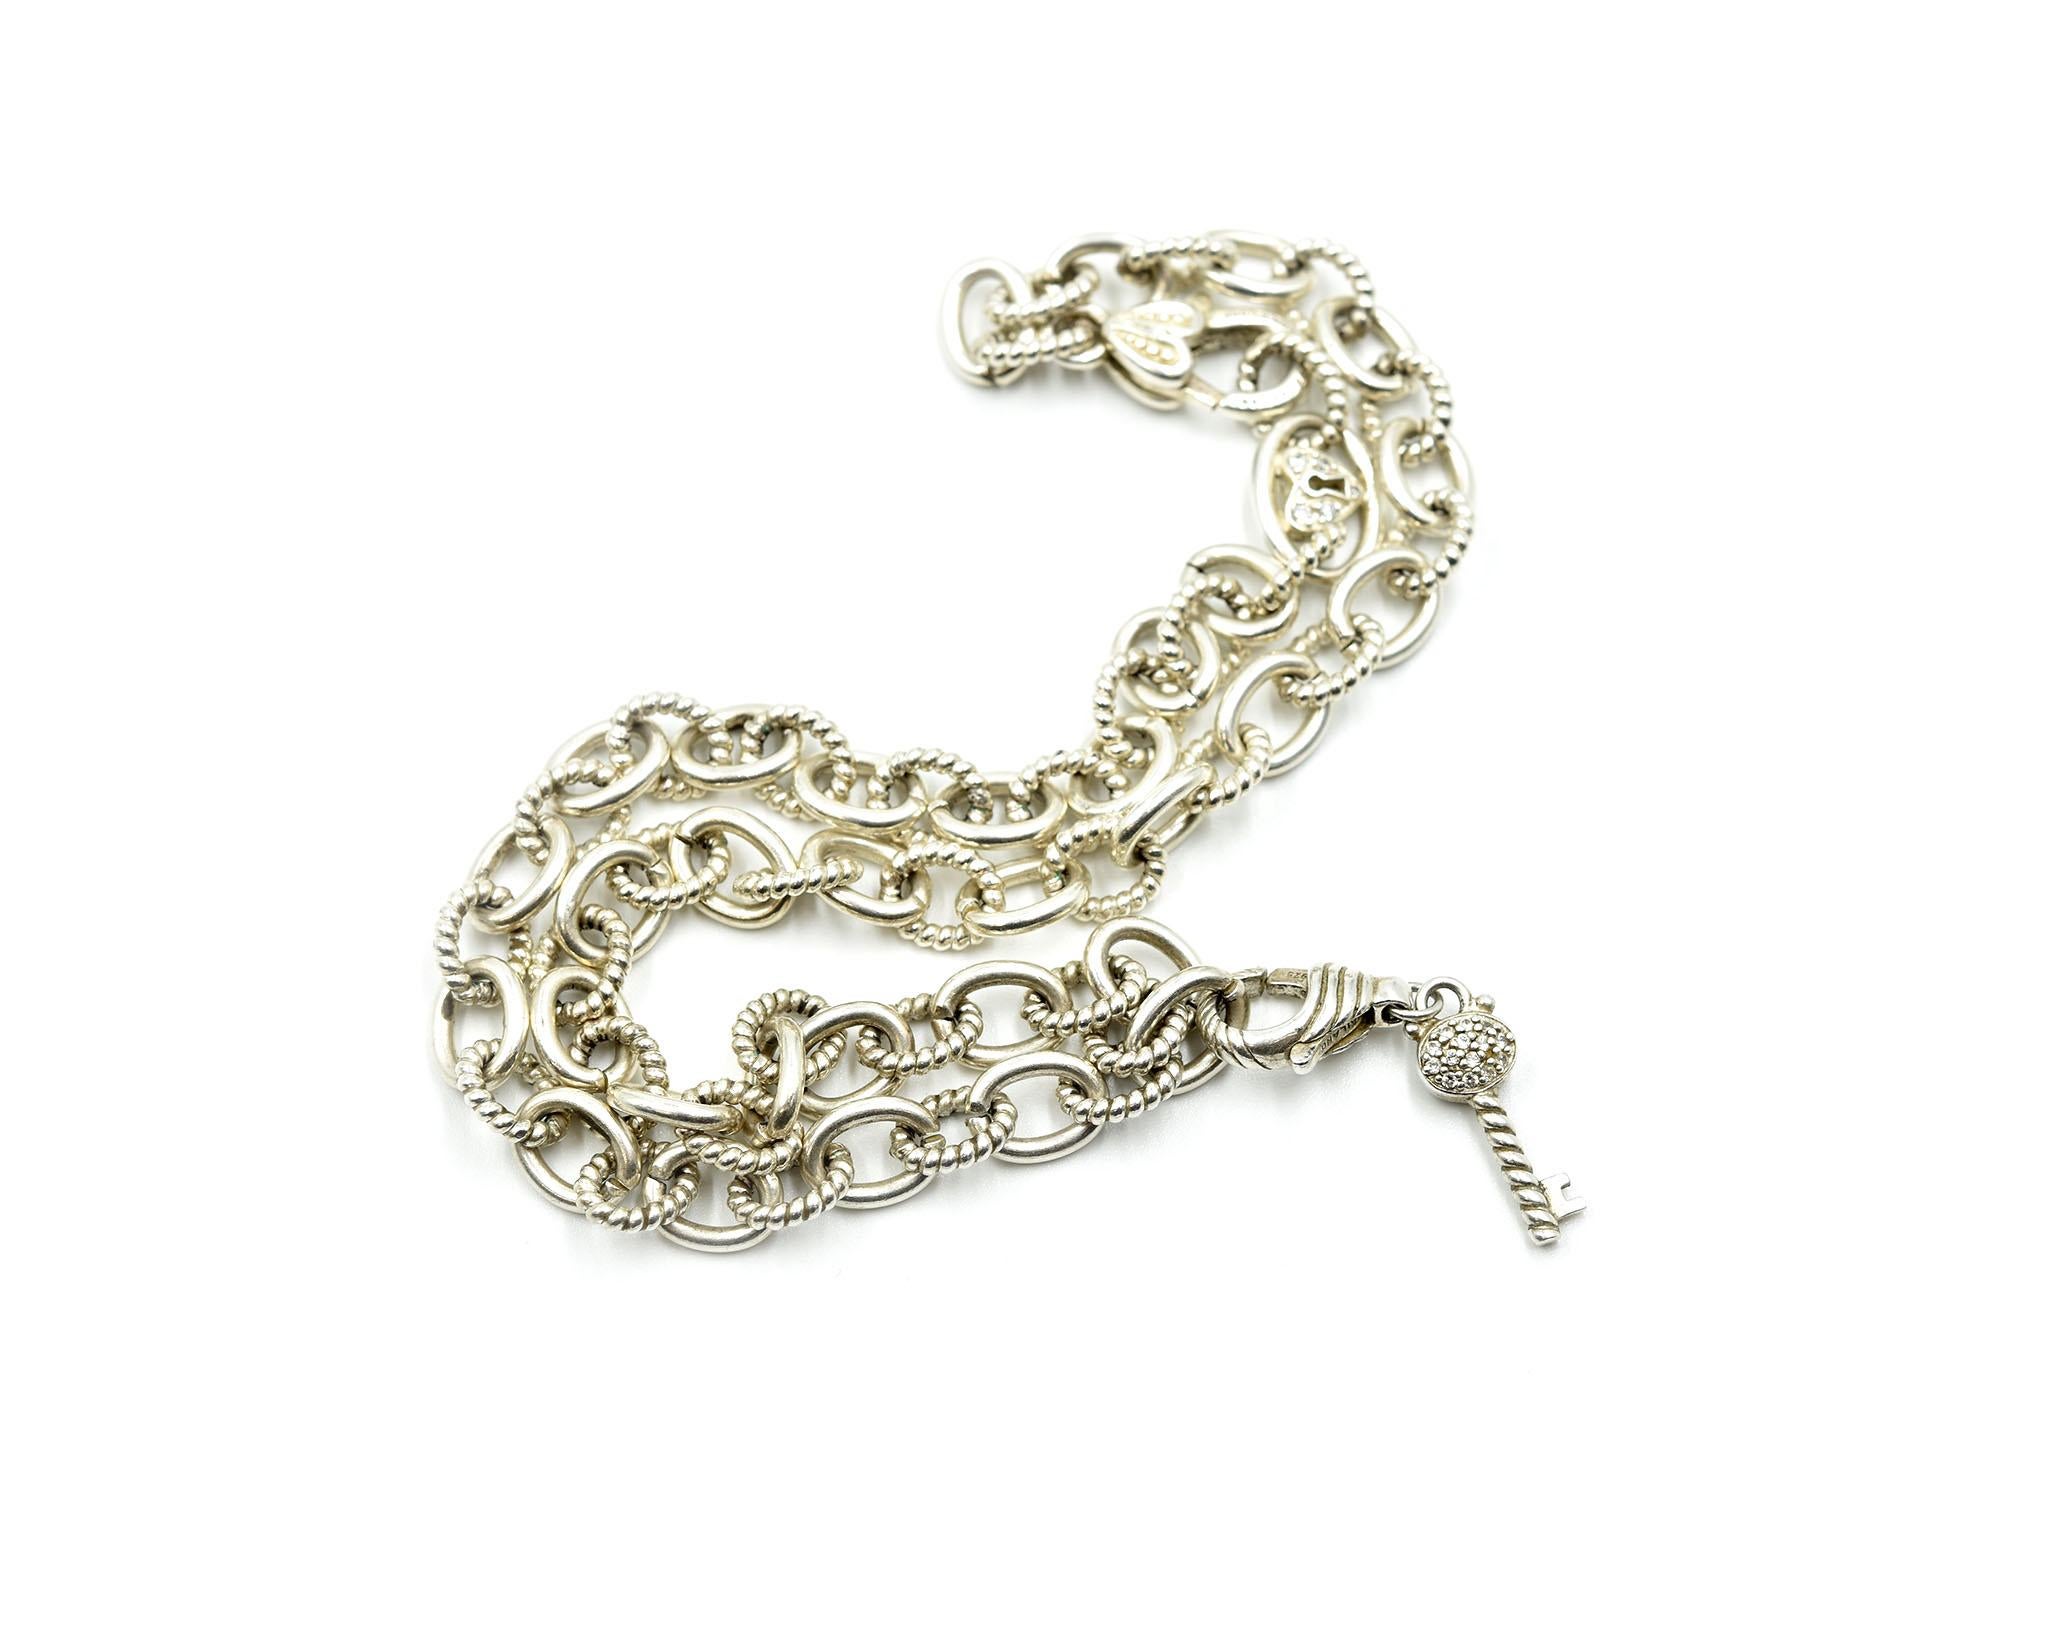 Designer: Judith Ripka
Collection: Cable Collection
Material: sterling silver
Dimensions: necklace measures 18 inches long, diamond key is 3/4-inches long and 1/4-inches wide
Weight: 49.50 grams
Retail: $700.00
